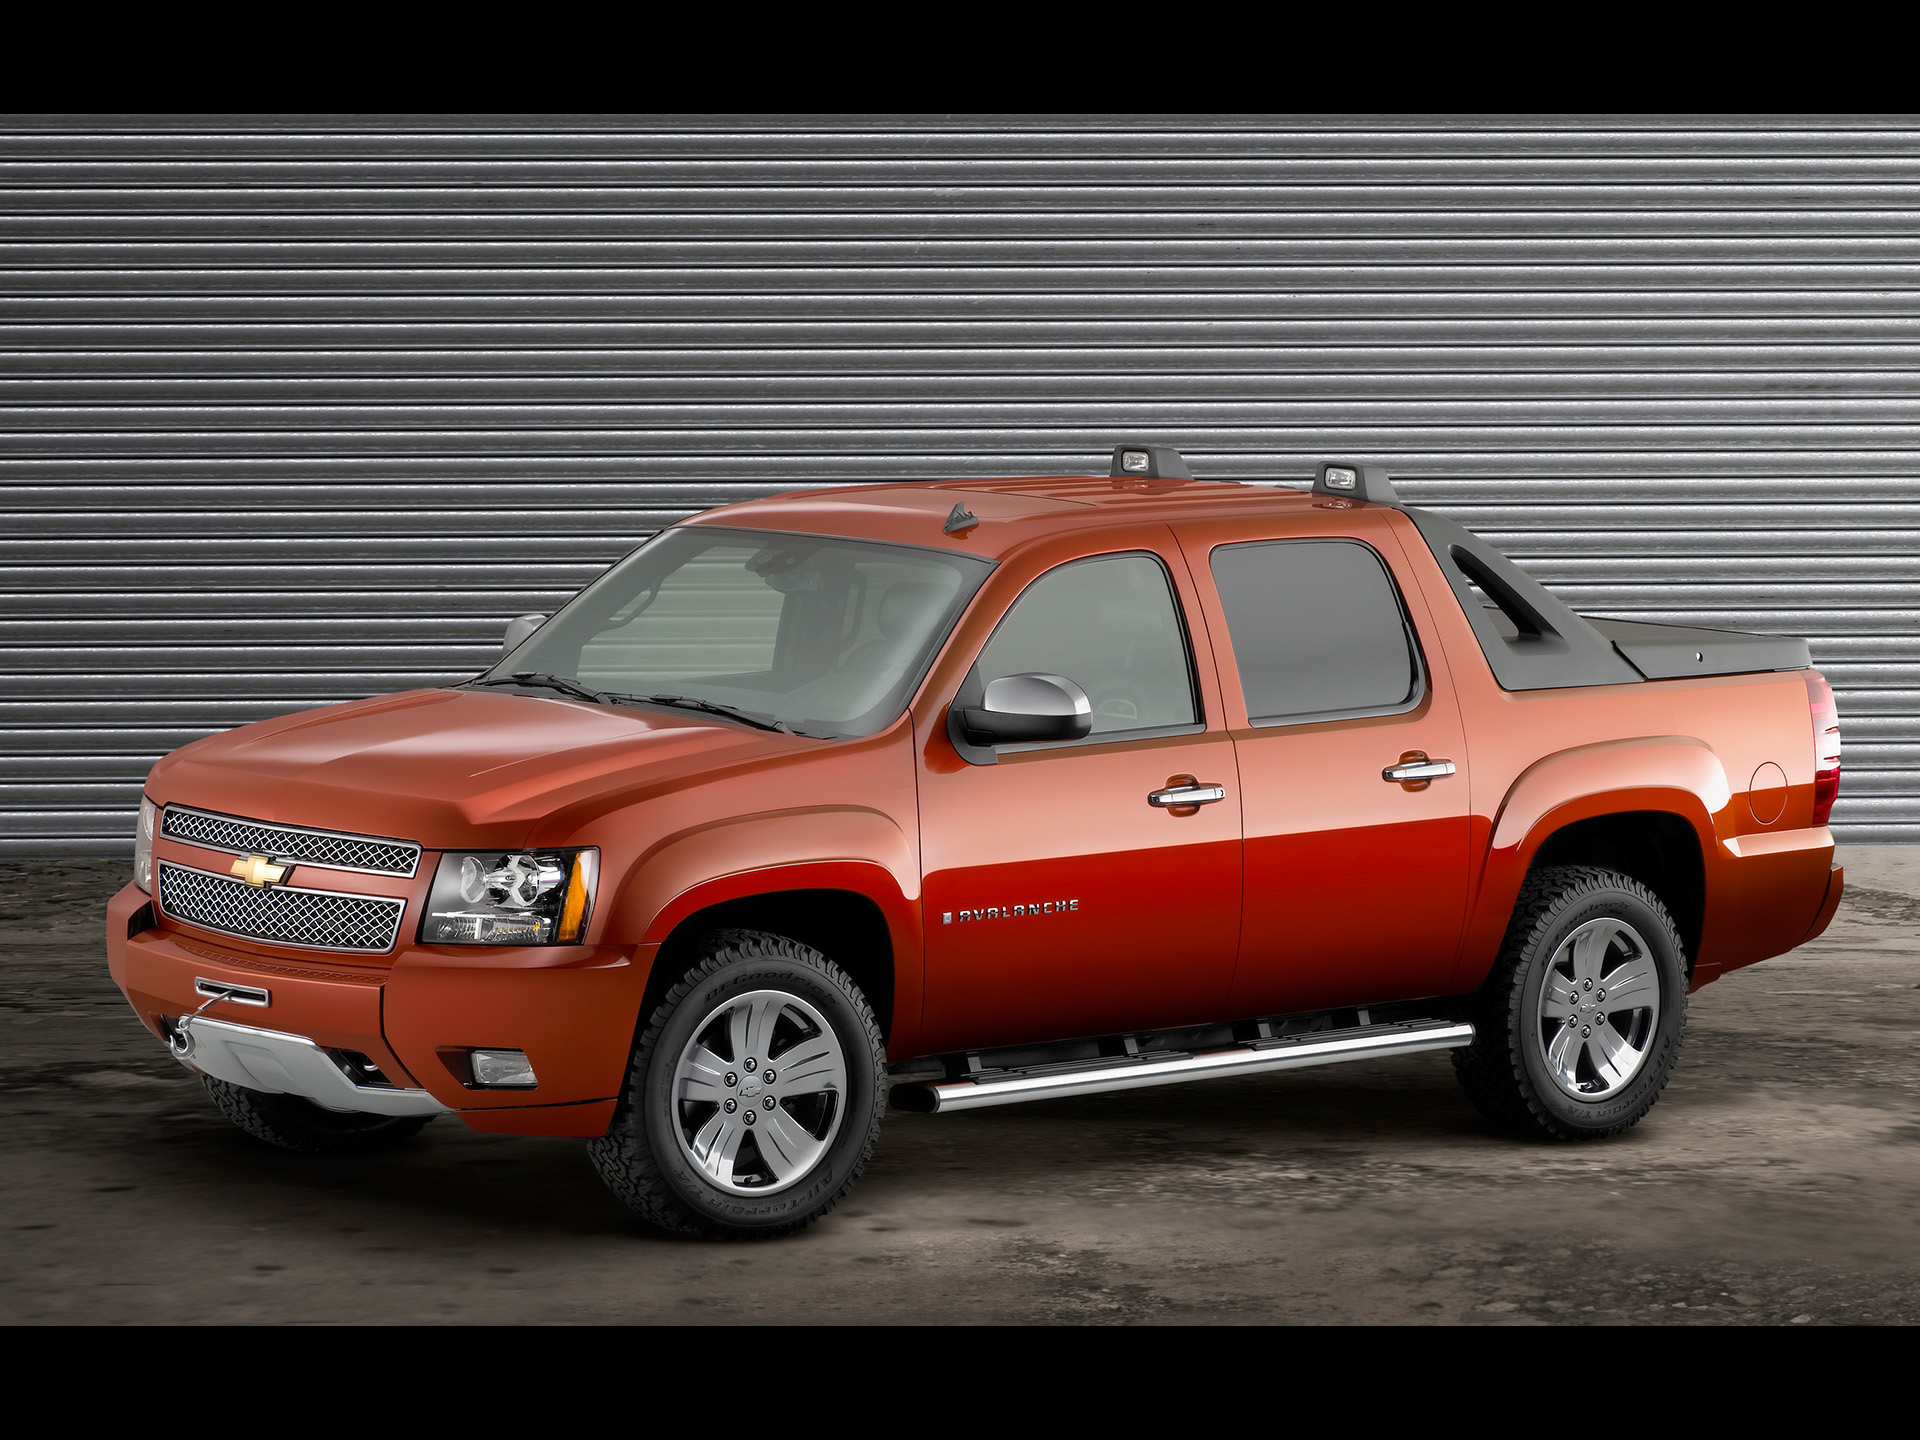 2007 Chevrolet Avalanche Z71 Plus - Side Angle - 1920x1440 - Wallpaper